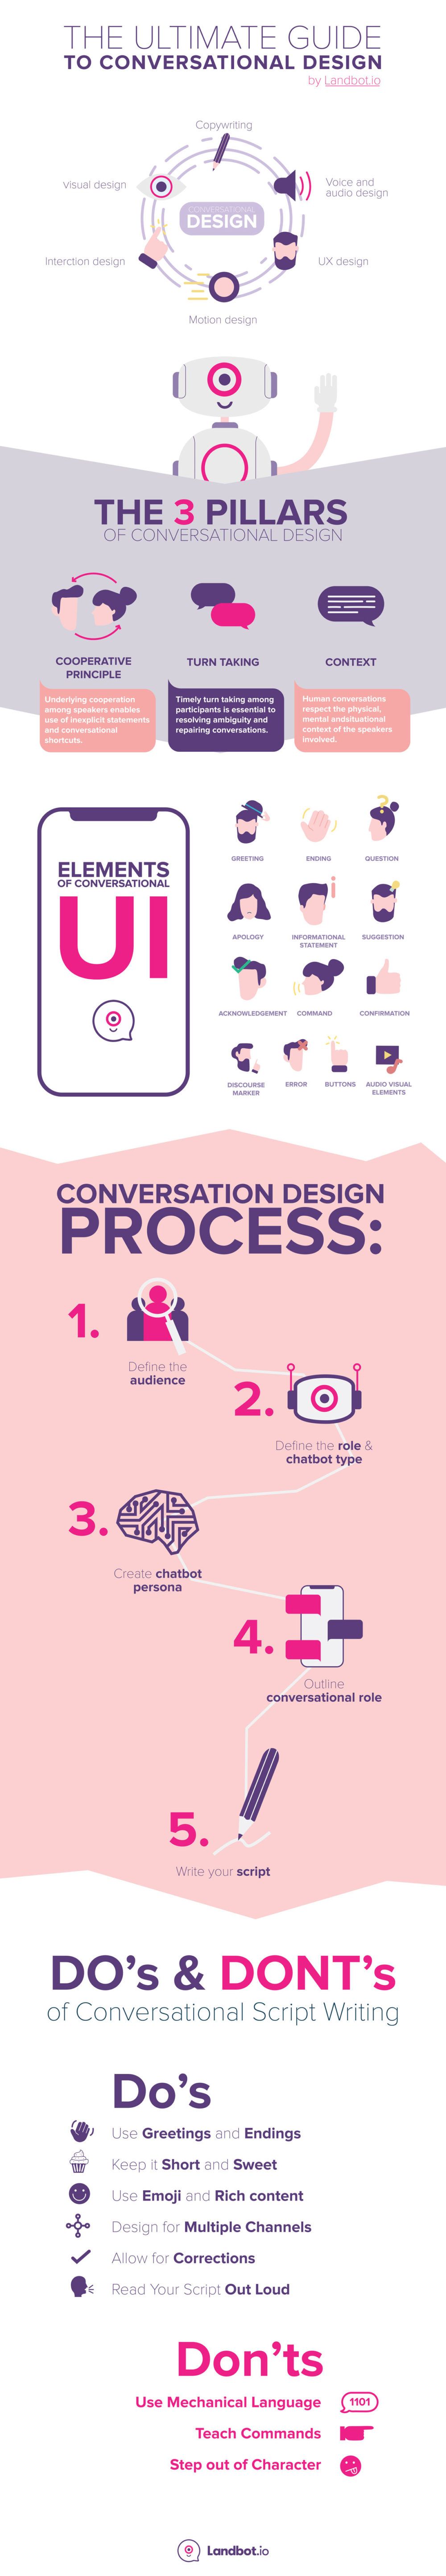 guide to conversational design infographic